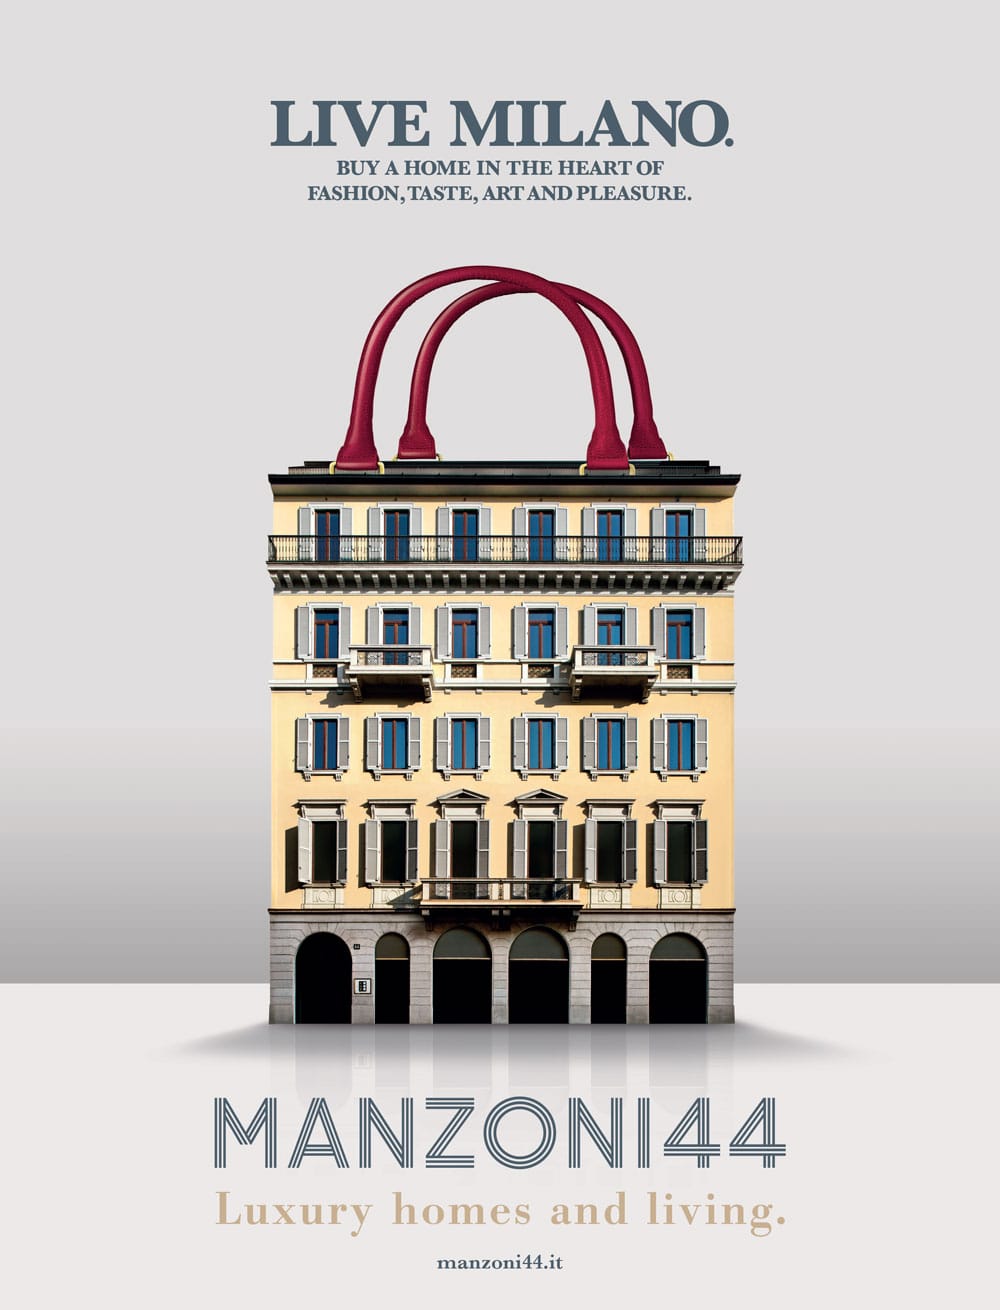 Print campaign made for Manzoni44. 'LIVE MILANO. BUY A HOME IN THE HEART OF FASHION, TASTE, ART AND PLEASURE.'